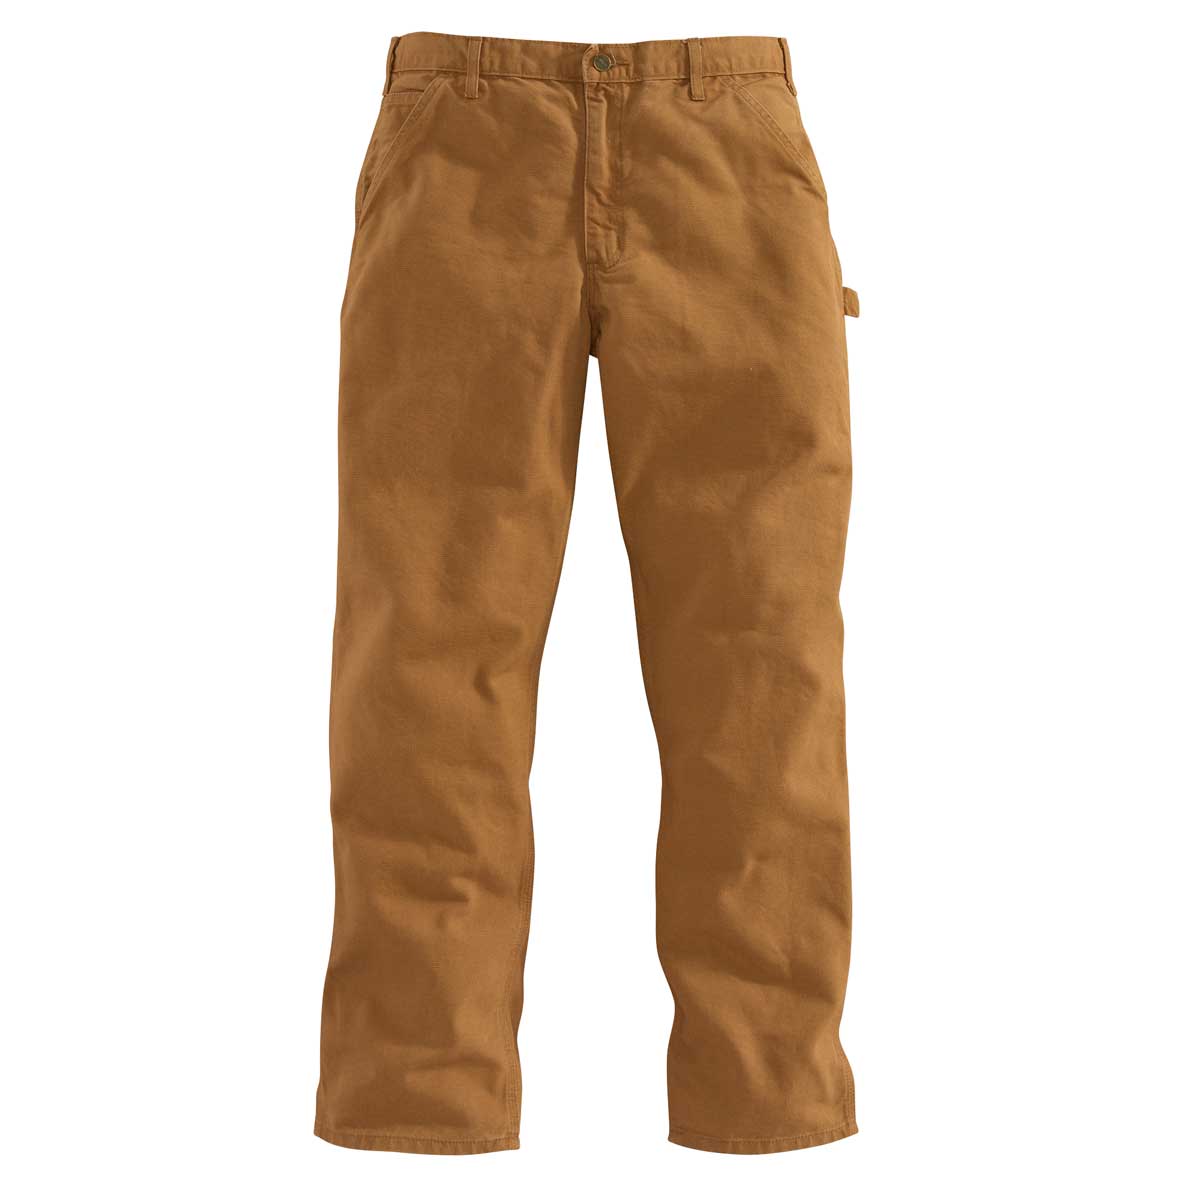 Carhartt B11 Washed Duck Work Pant 42